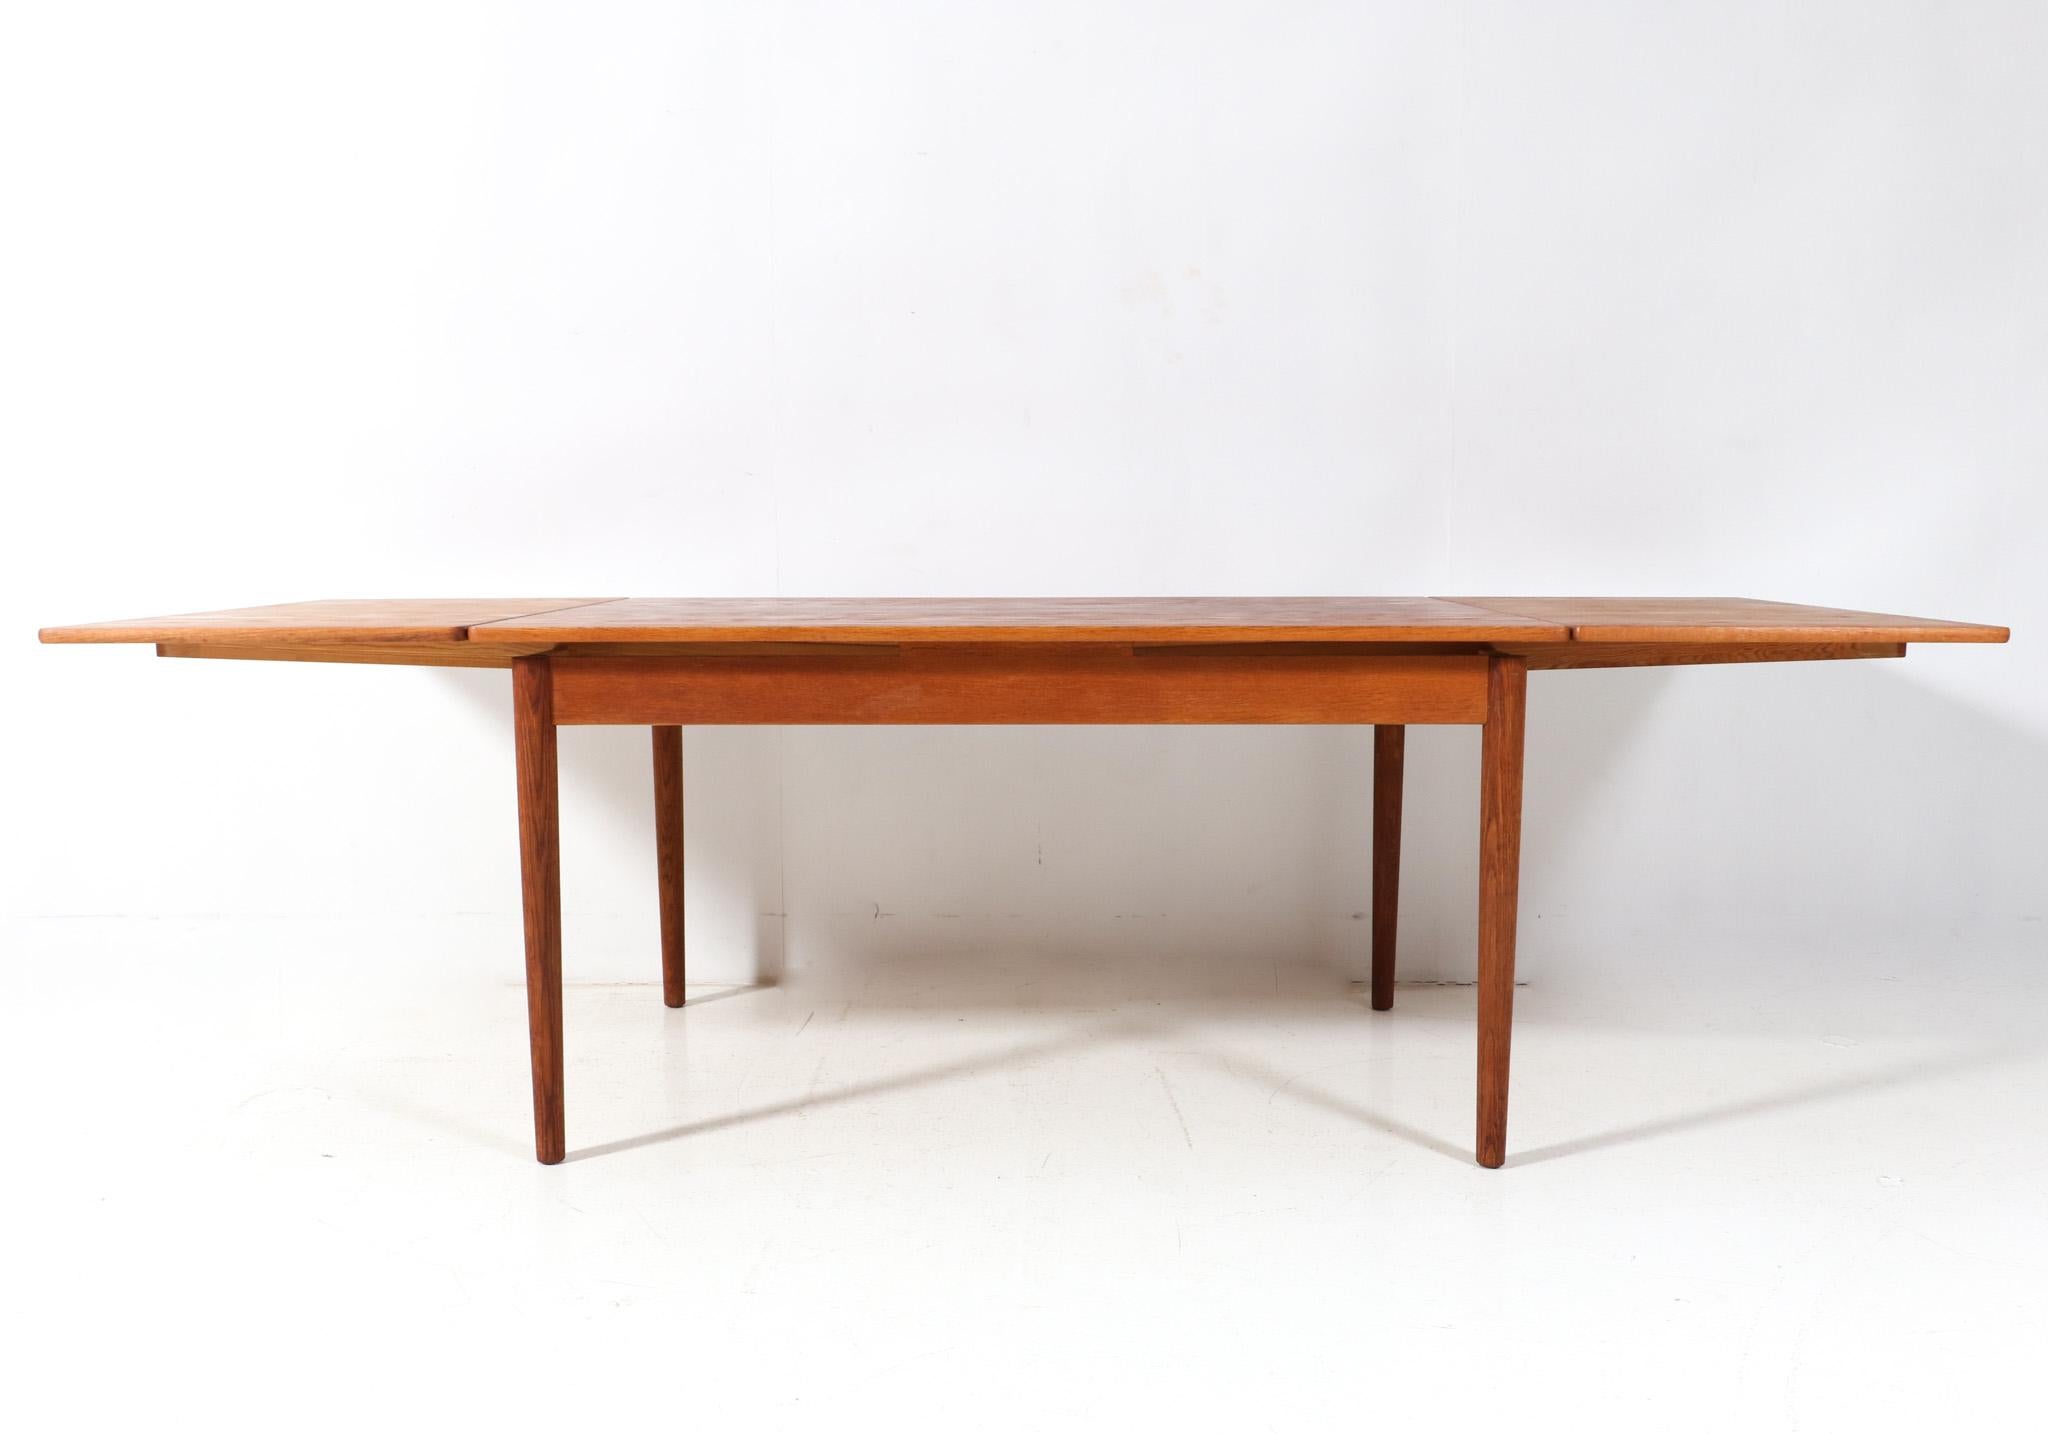  Mid-Century Modern Oak AT-316 Dining Table by Hans J. Wegner for Andreas Tuck For Sale 1